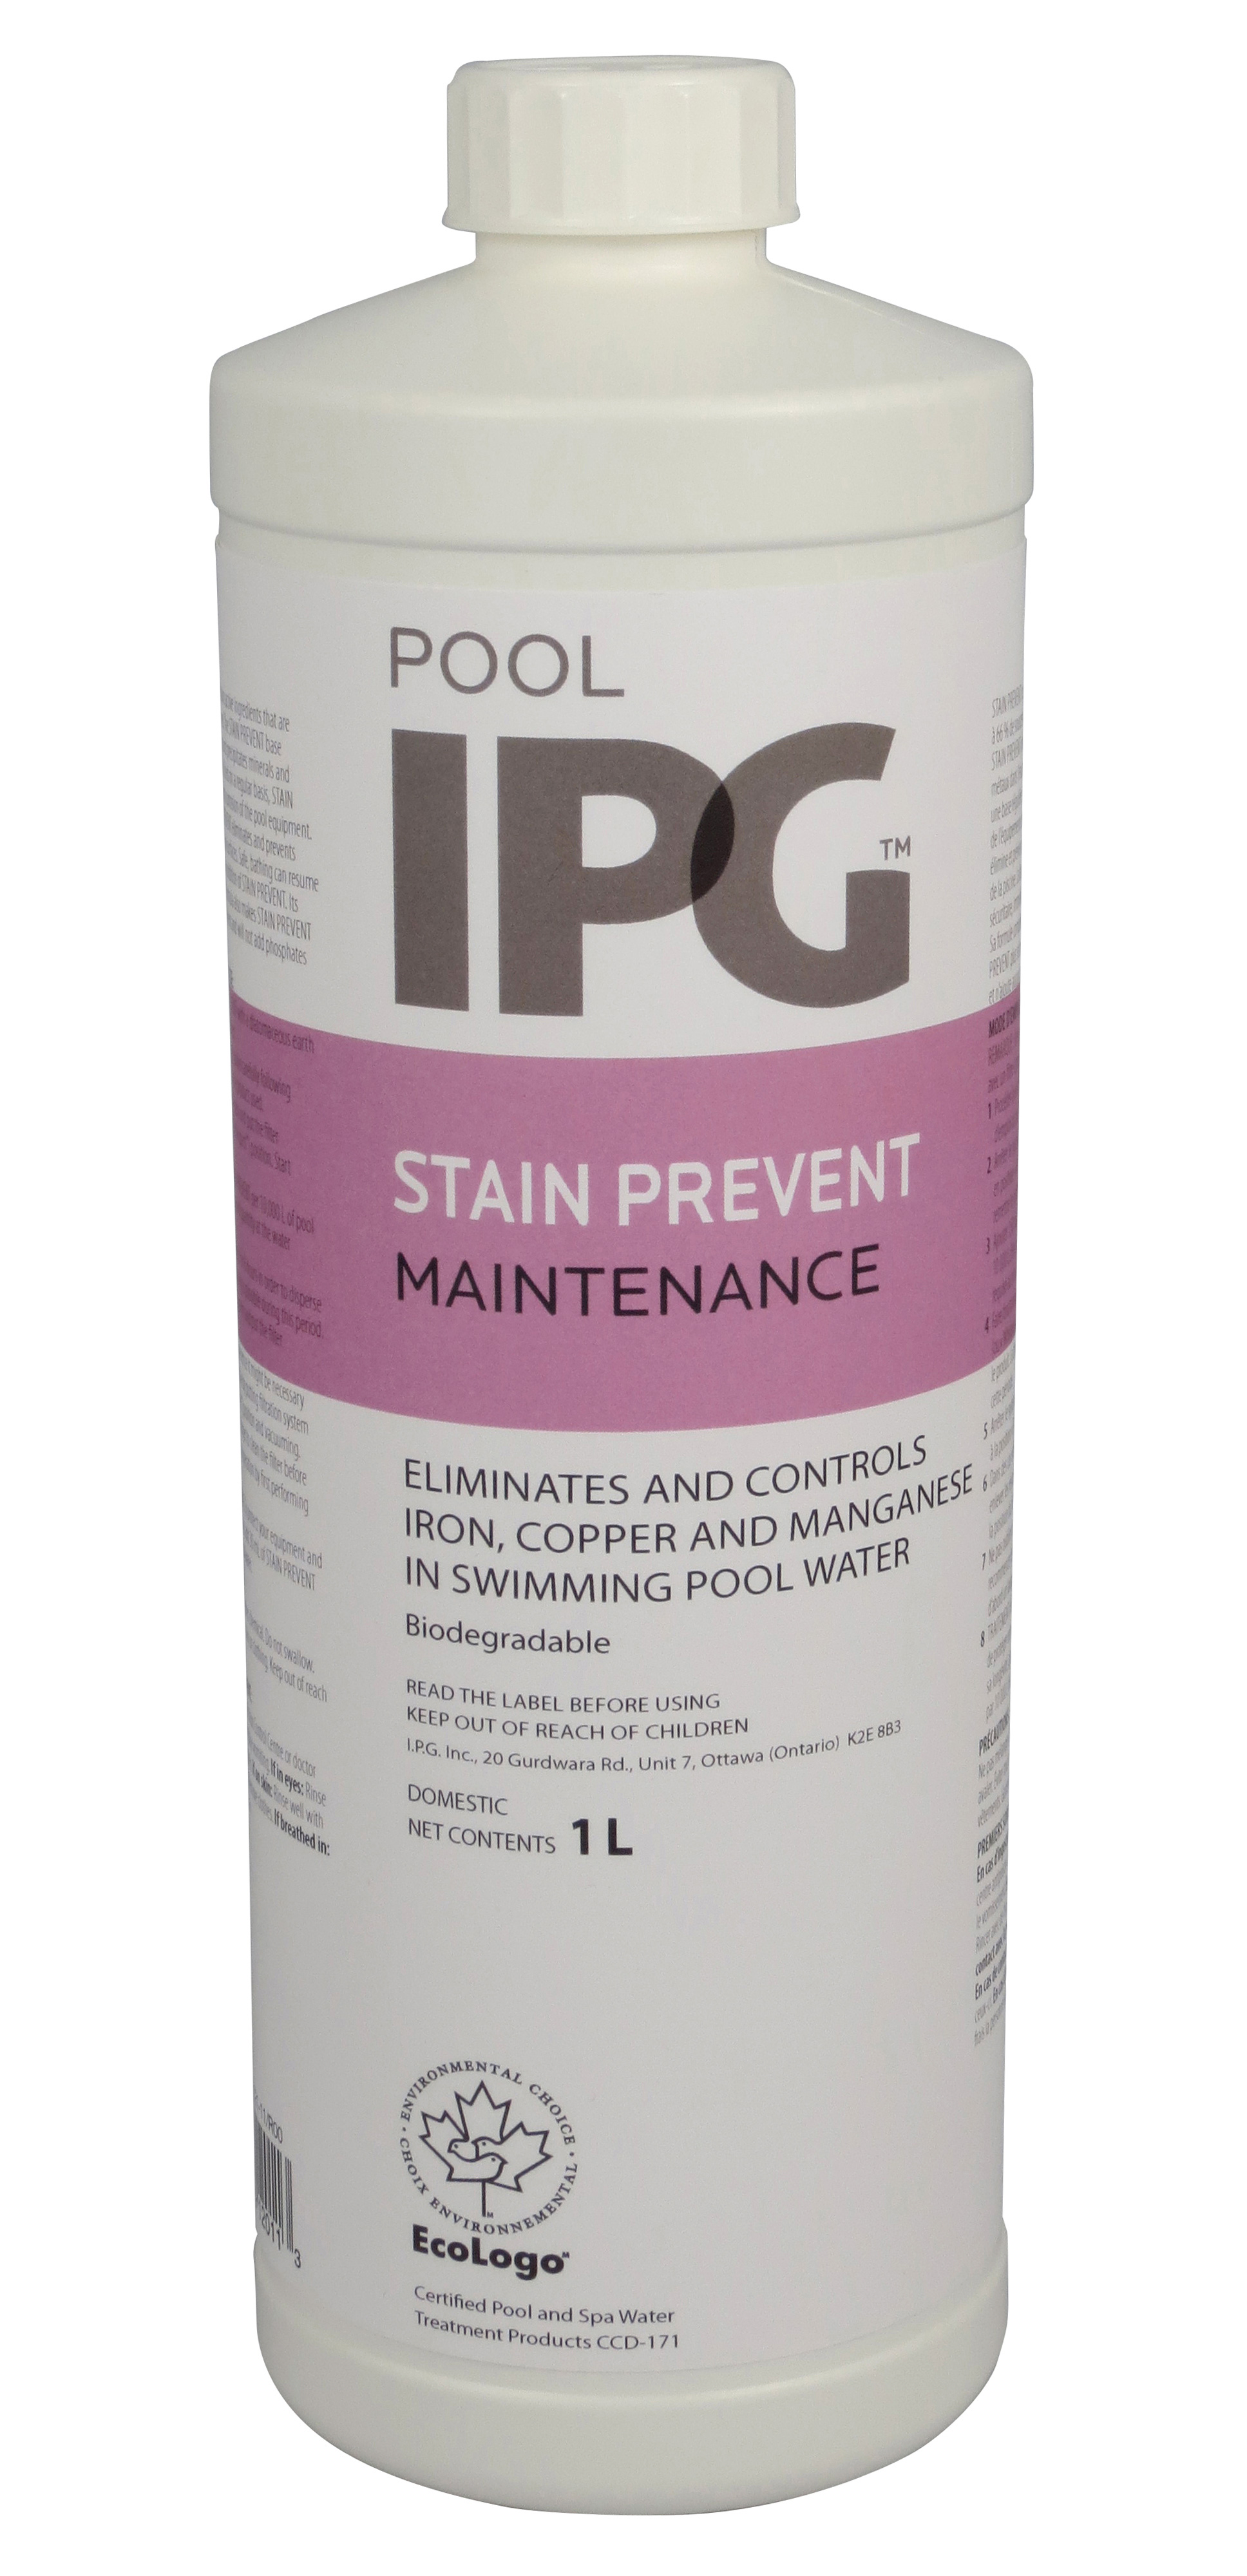 Stain Prevent pool water conditioner